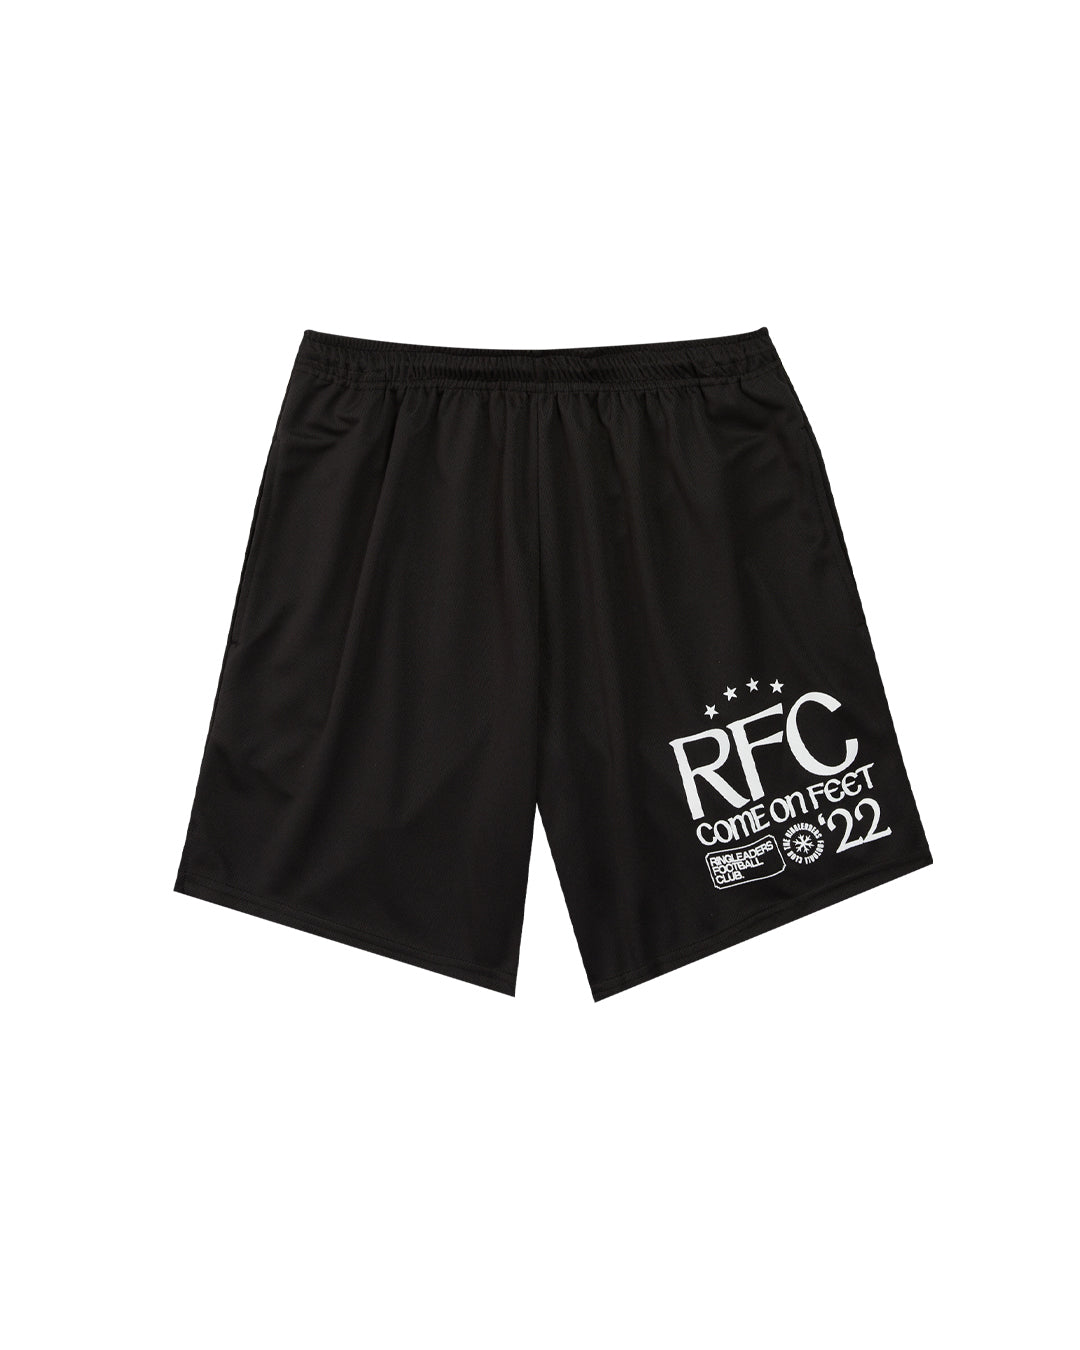 "Come On Feet" Futsal Shorts with Signature Pockets